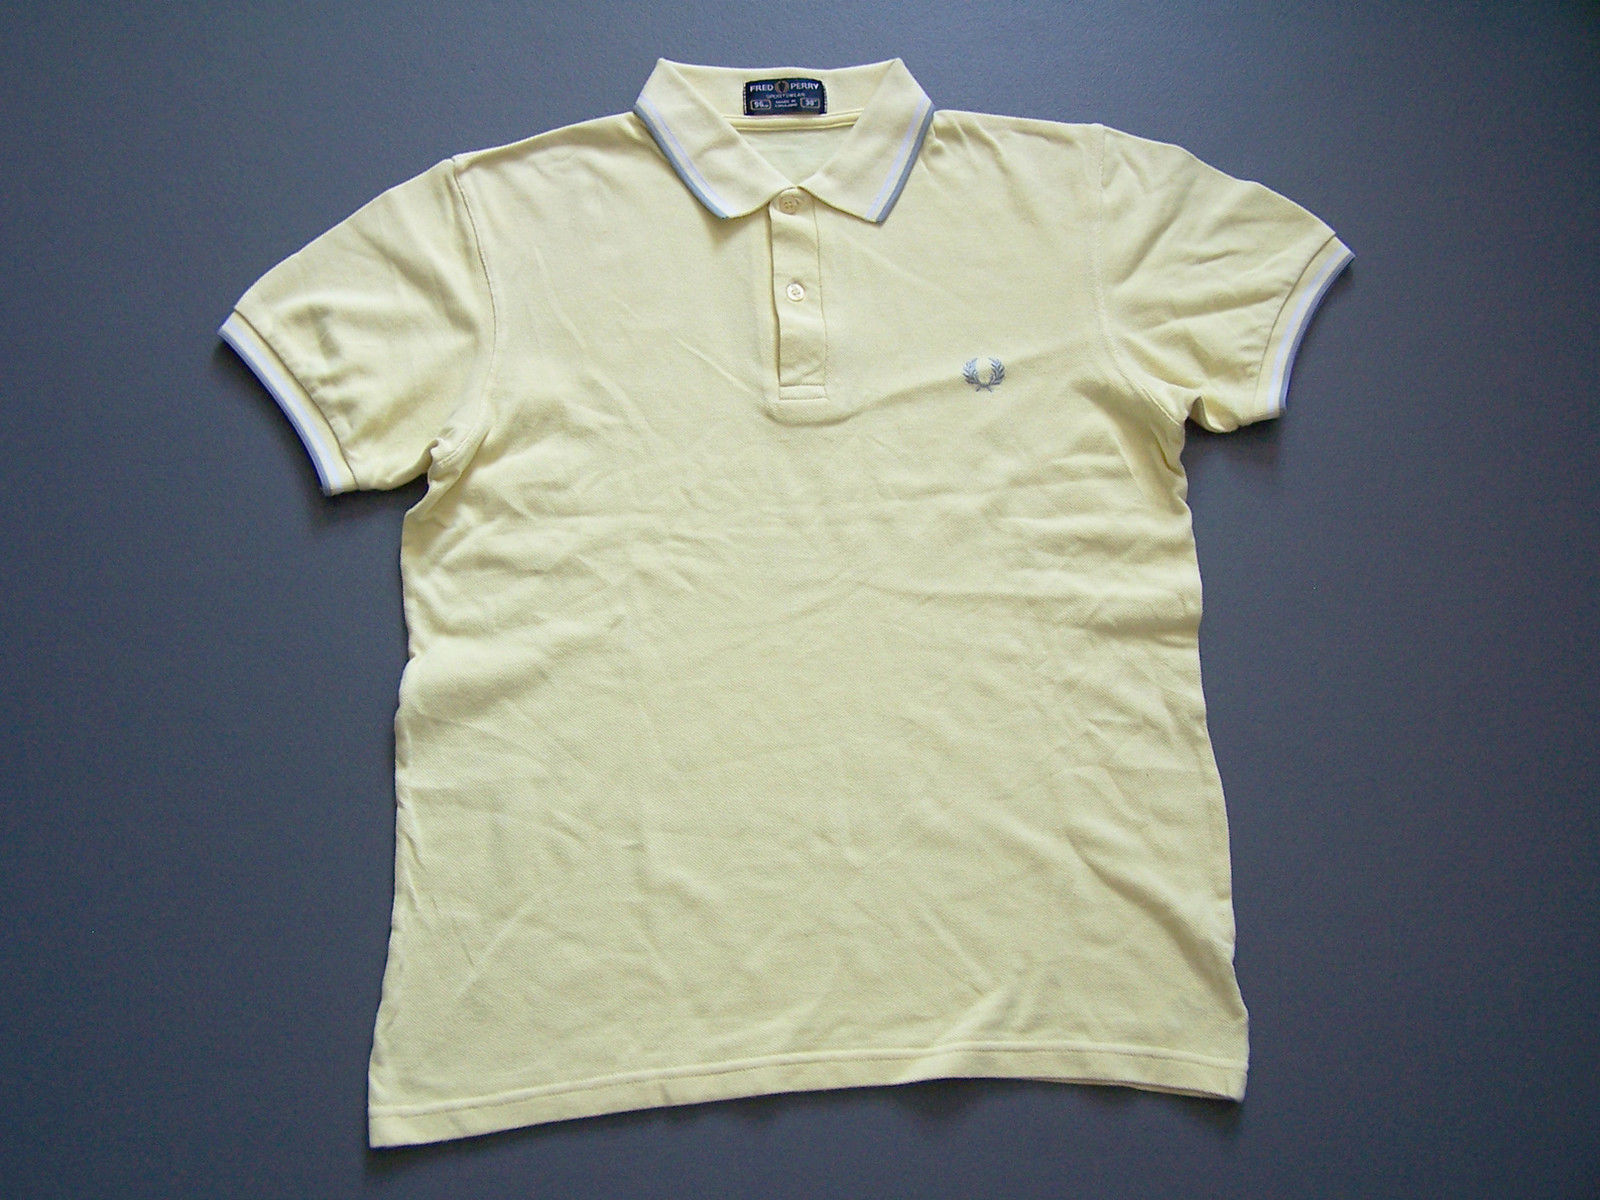 Fred Perry Polo Shirt Men's Yellow Vintage Itax076 - Polo Shirt , HD Wallpaper & Backgrounds